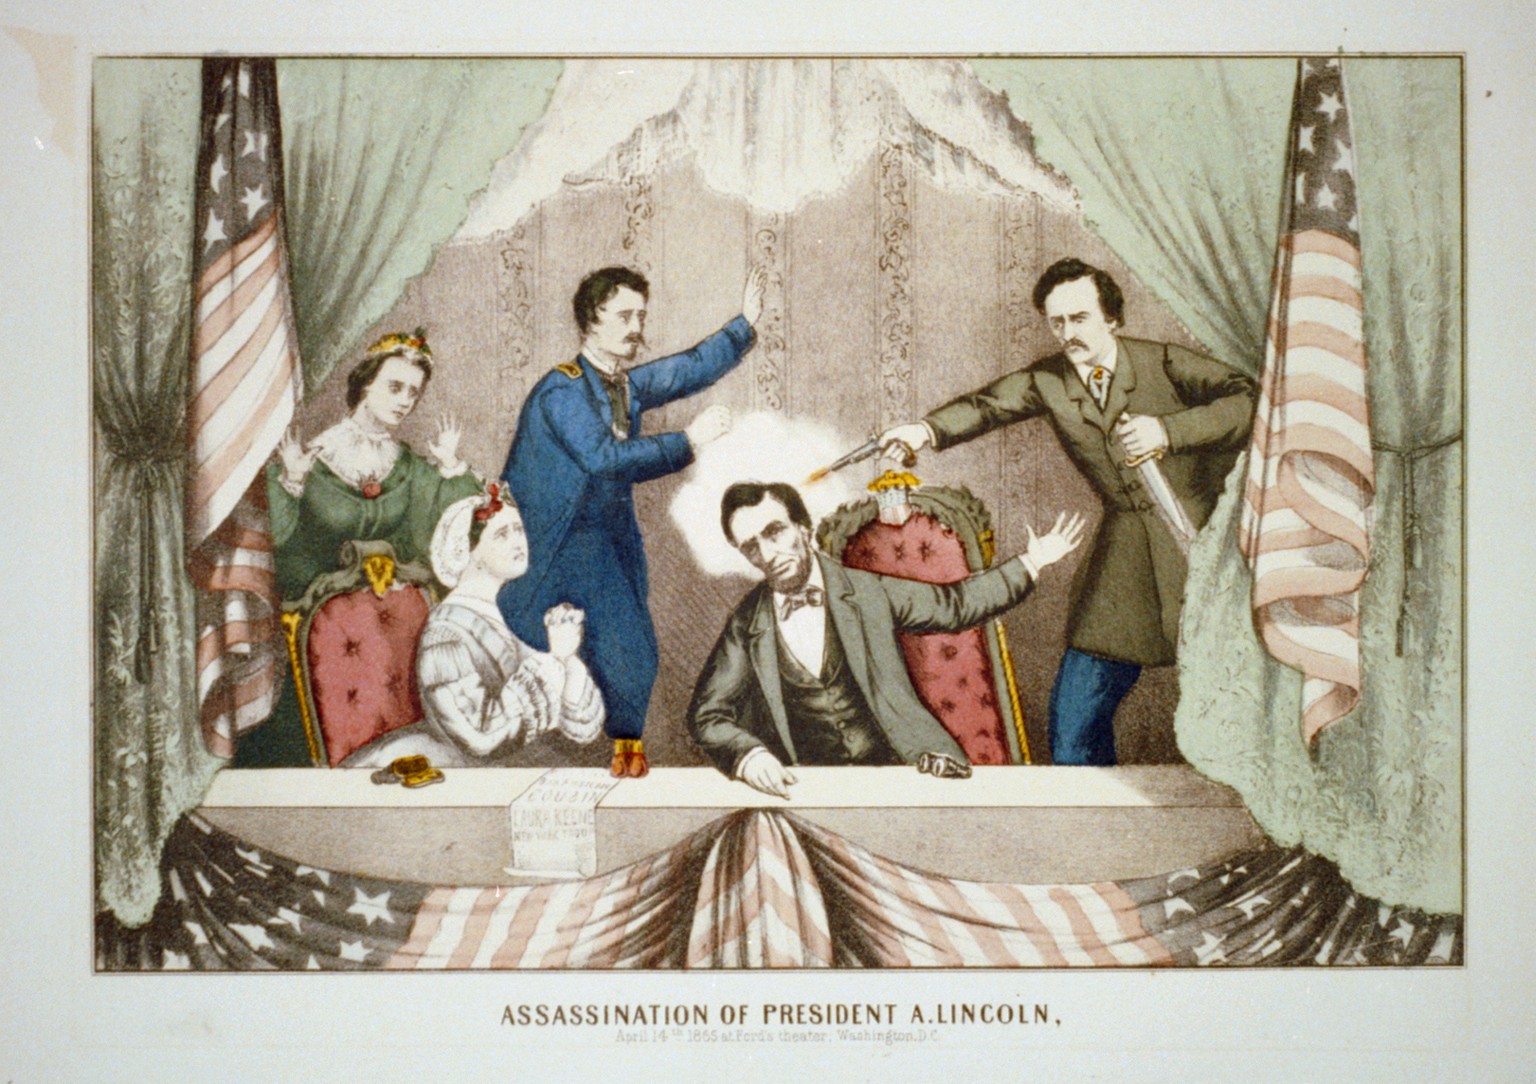 Print shows the president's box at Ford's Theater with John Wilkes Booth, on the right, shooting President Lincoln who is seated at the front of the box; on the left are Mary Todd Lincoln seated in the front, Major Henry Rathbone rising to stop Booth, and Clara Harris standing behind Mrs. Lincoln.